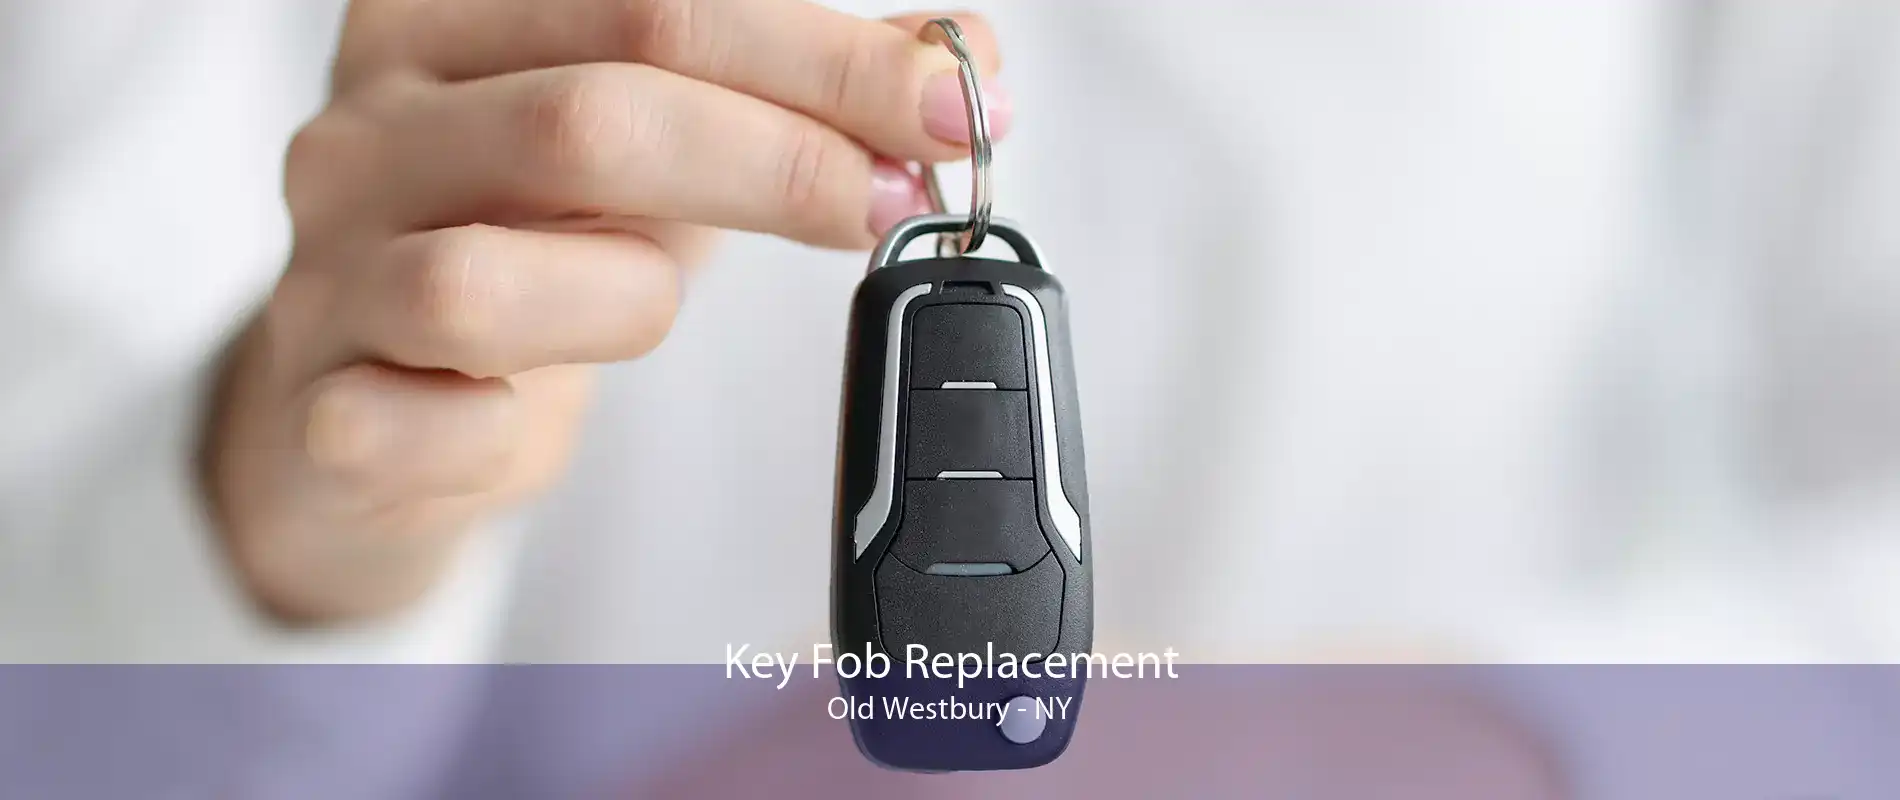 Key Fob Replacement Old Westbury - NY